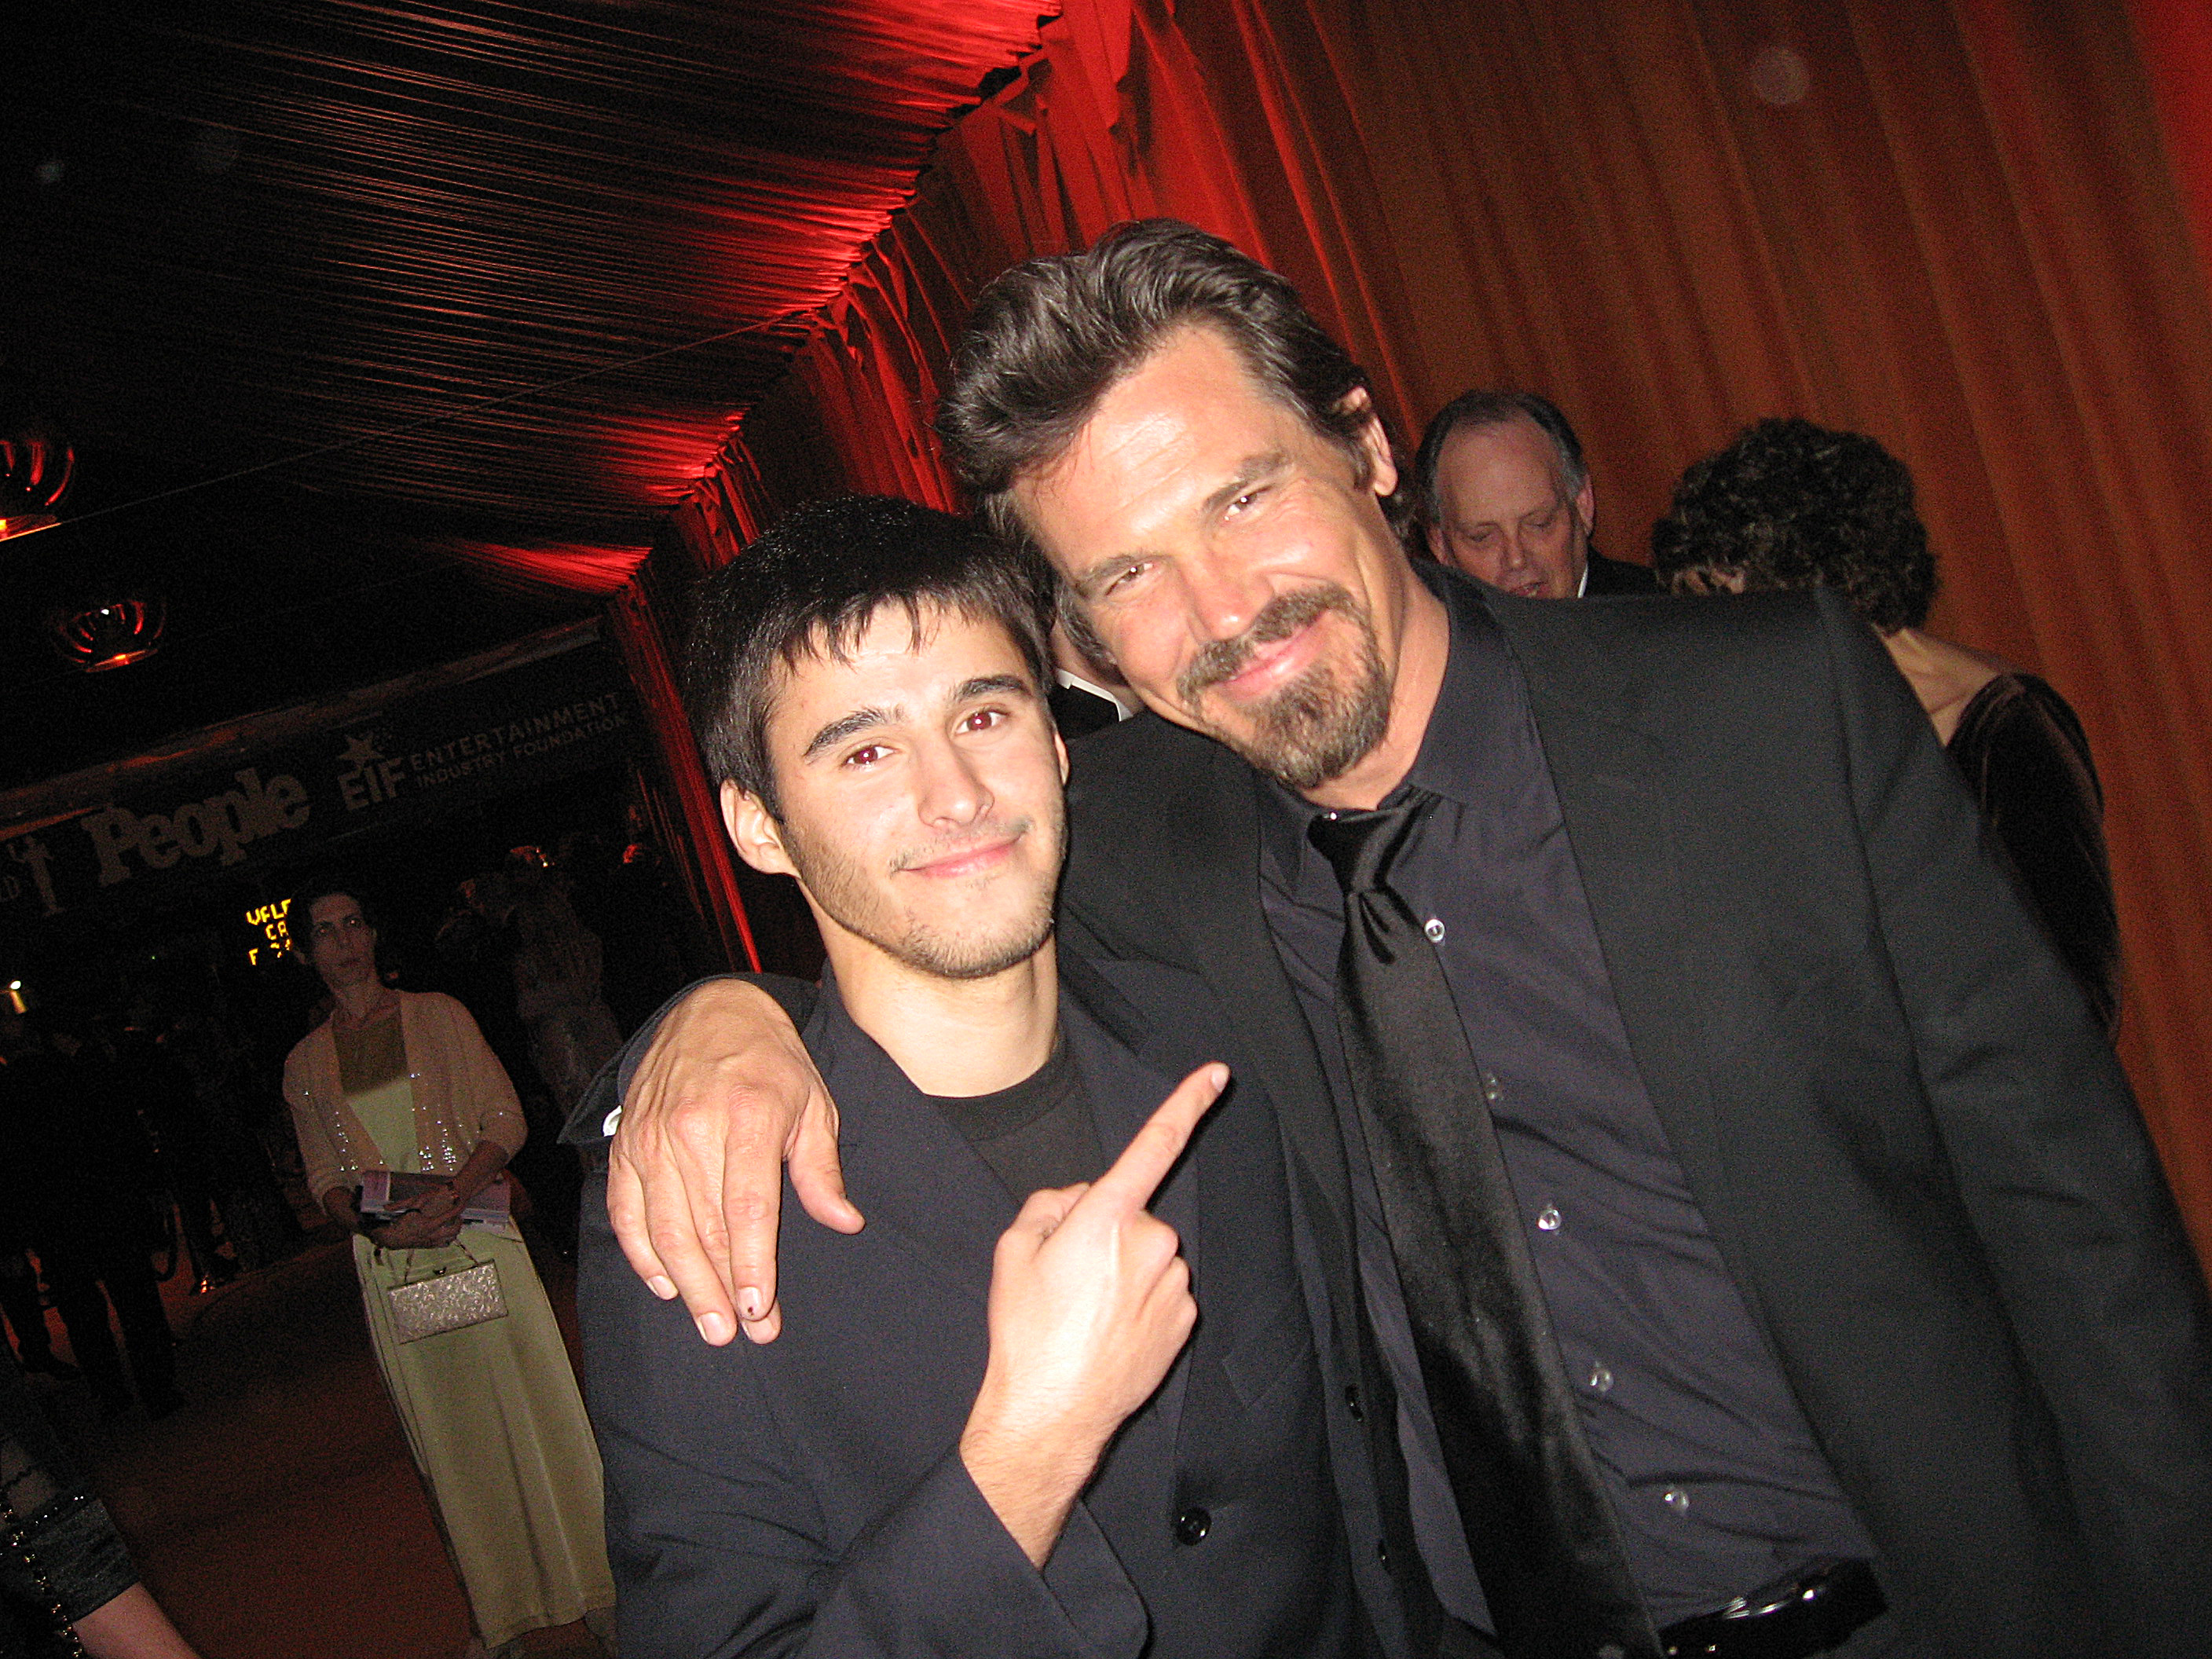 Producer Josh Wood (L) and actor Josh Brolin (R) attend the 15th Annual Screen Actors Guild Awards cocktail party held at the Shrine Auditorium on January 25, 2009 in Los Angeles, California.